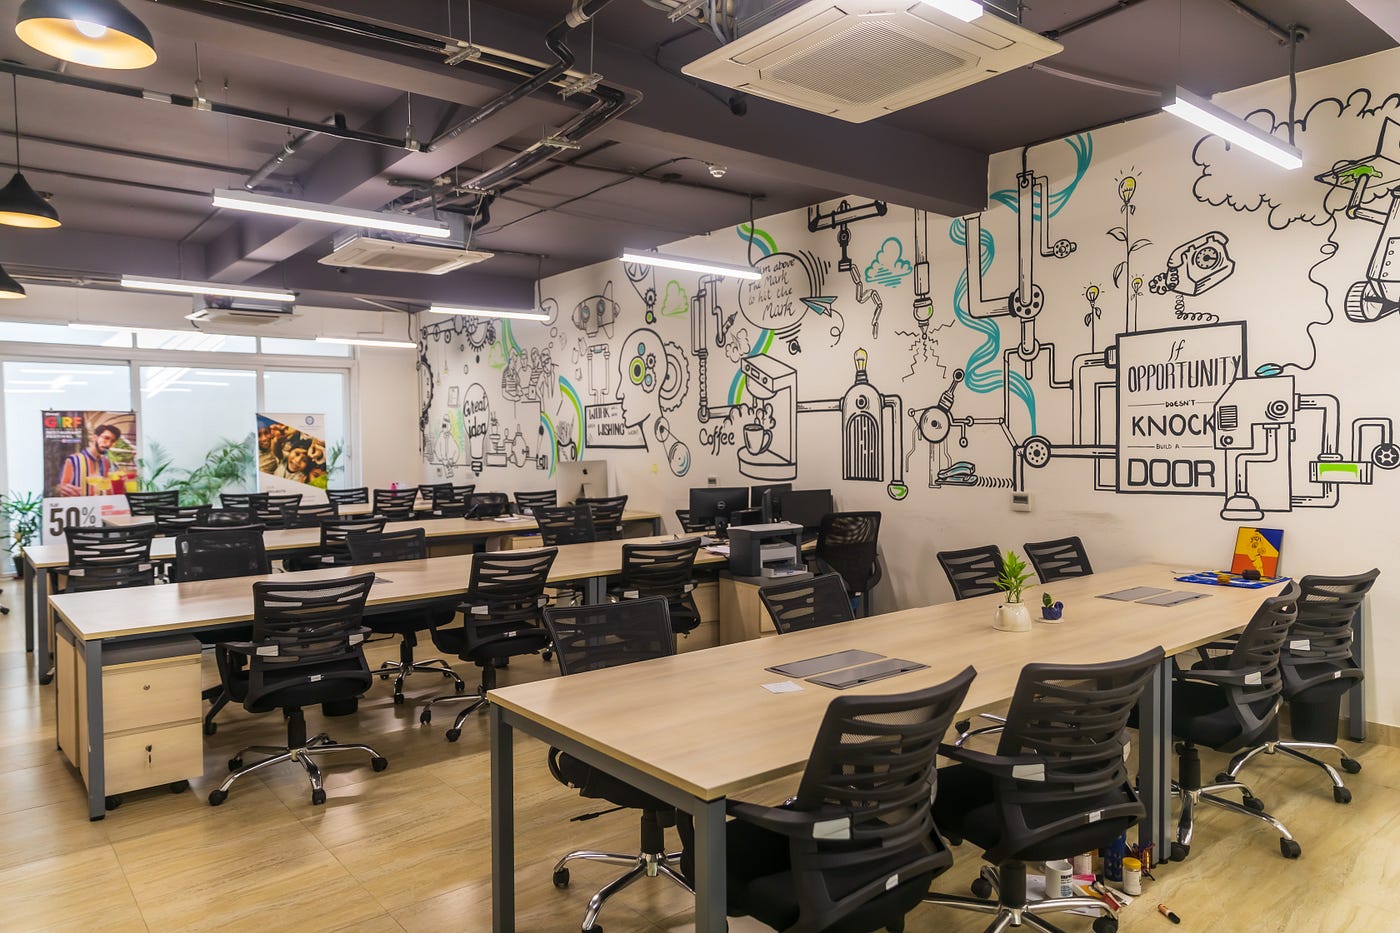 Are You Looking For Coworking Space in Delhi And Shared Office SpacesReal EstateOffice-Commercial For Rent LeaseCentral DelhiConnaught Place